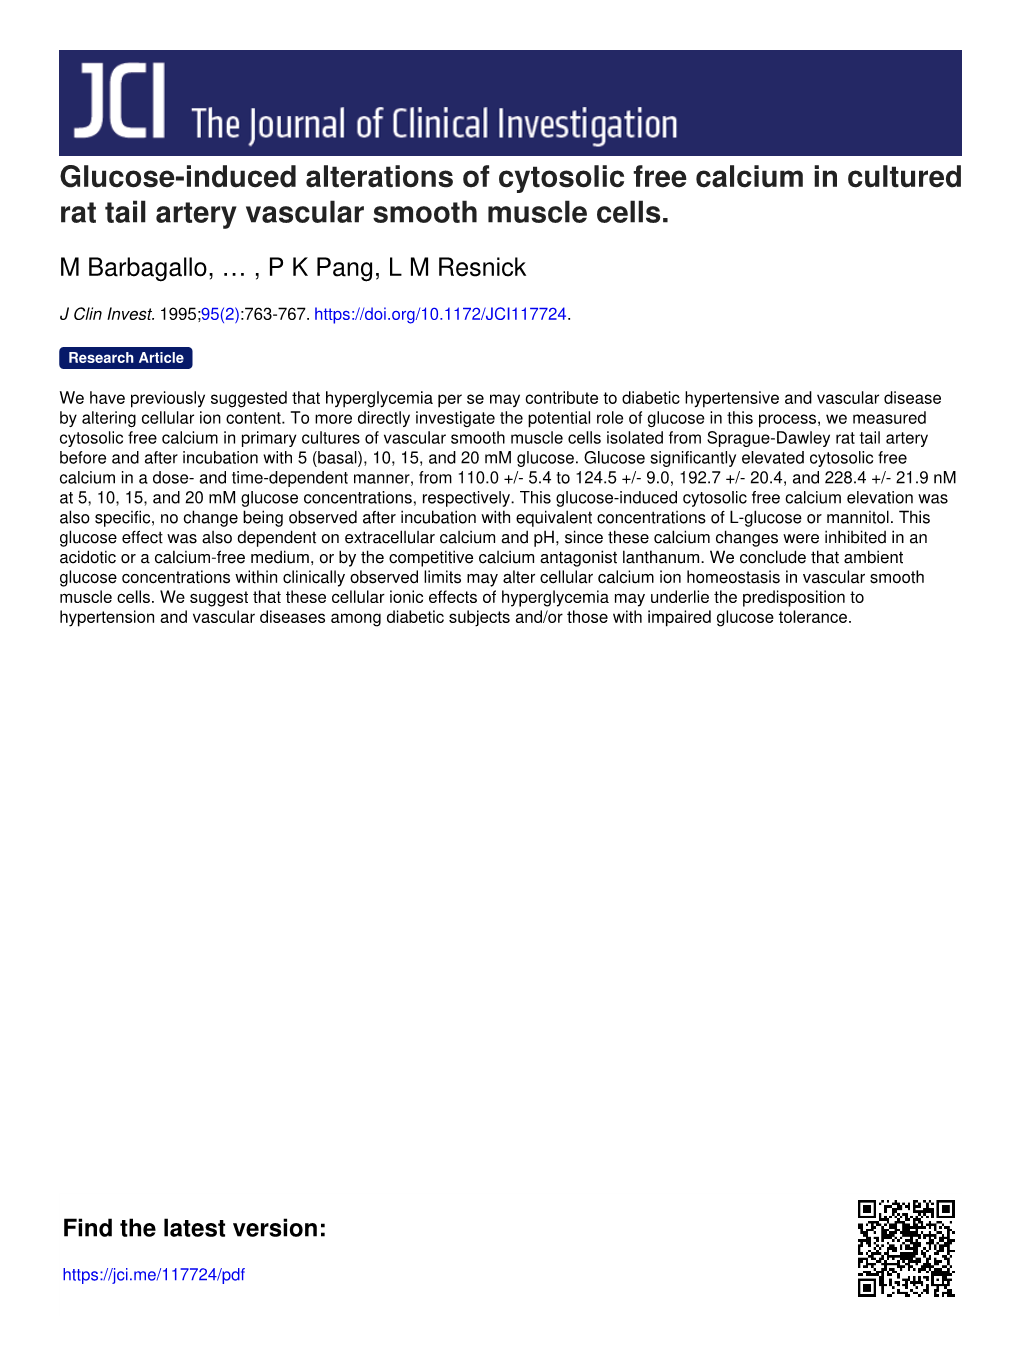 Glucose-Induced Alterations of Cytosolic Free Calcium in Cultured Rat Tail Artery Vascular Smooth Muscle Cells